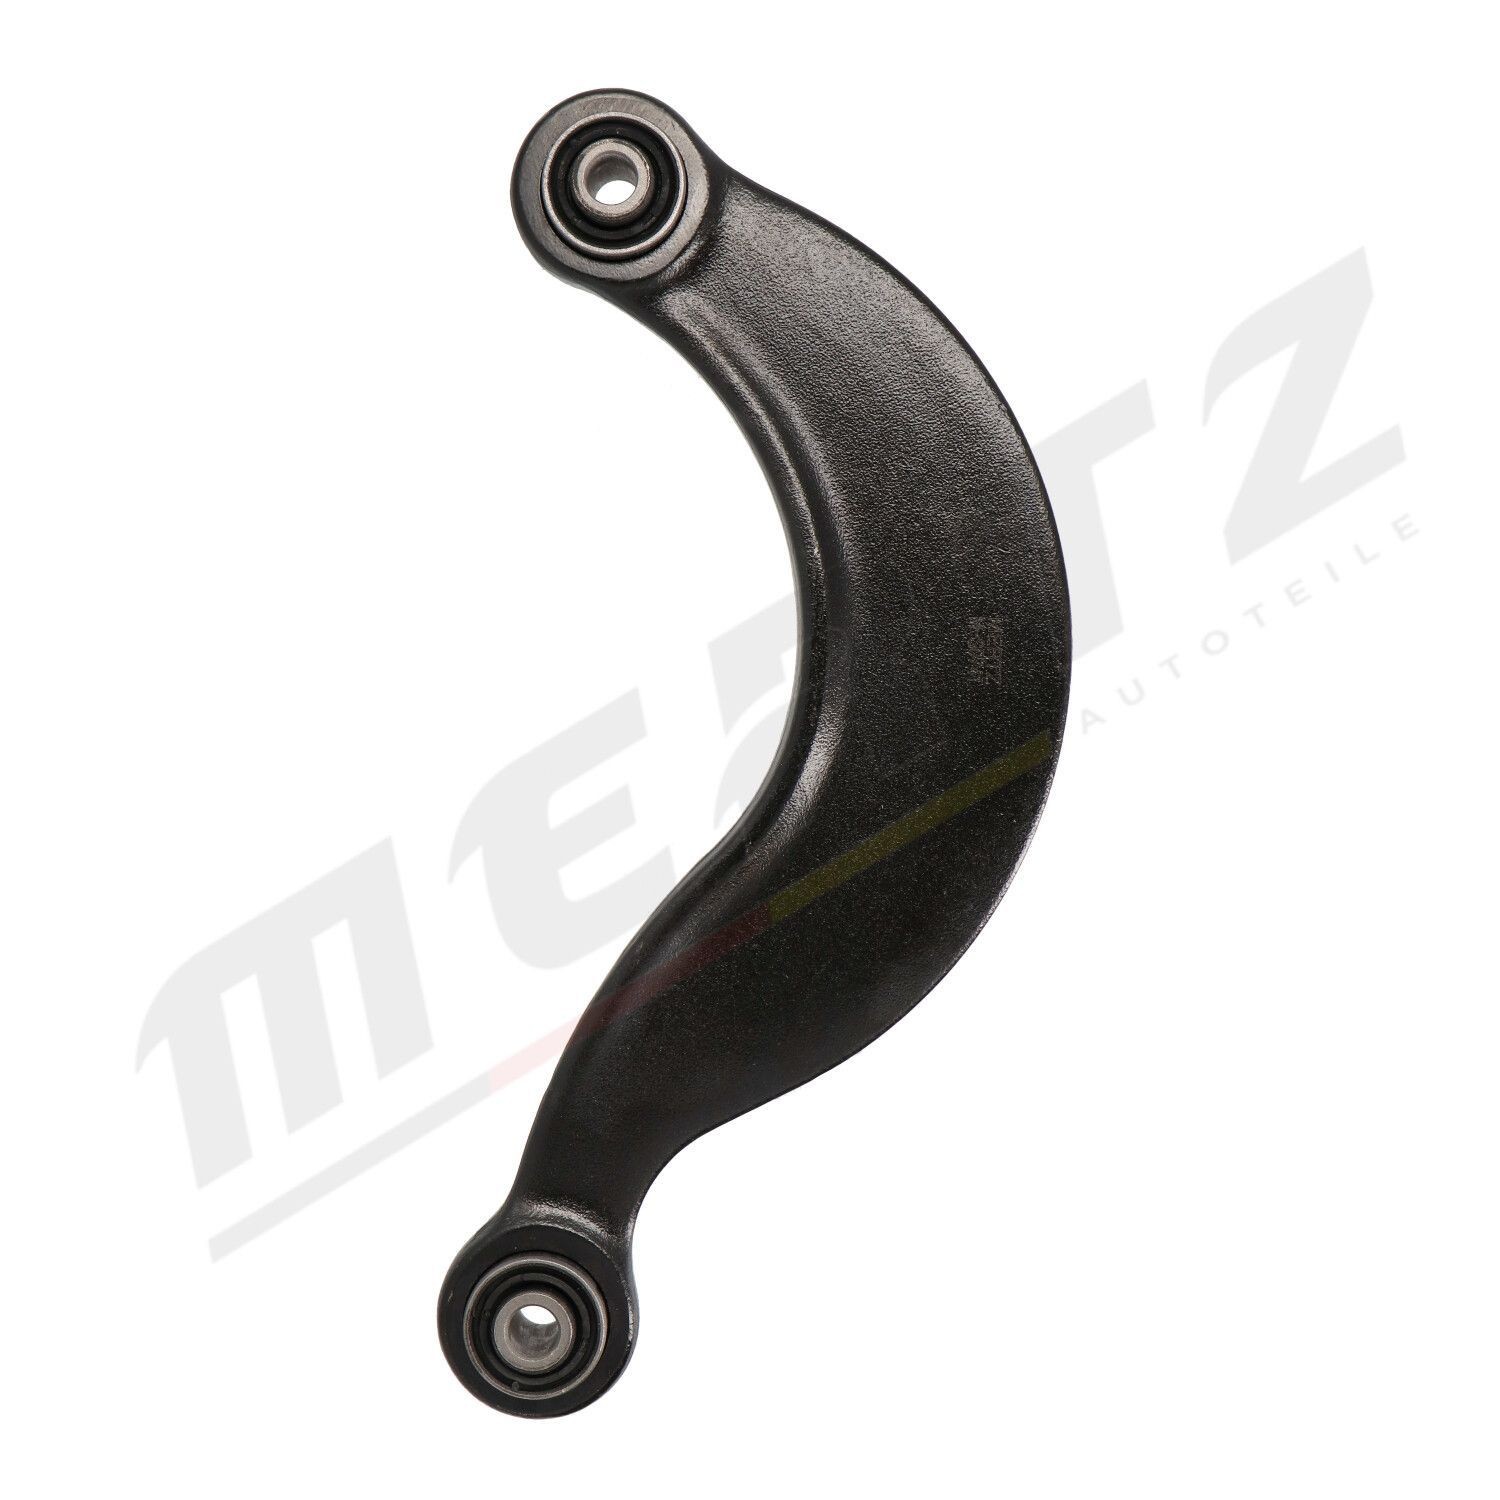 Suspension arms MERTZ with bearing(s), Rear Axle Left, Rear Axle Right, Control Arm, Cast Steel, Guide Rod - M-S0741